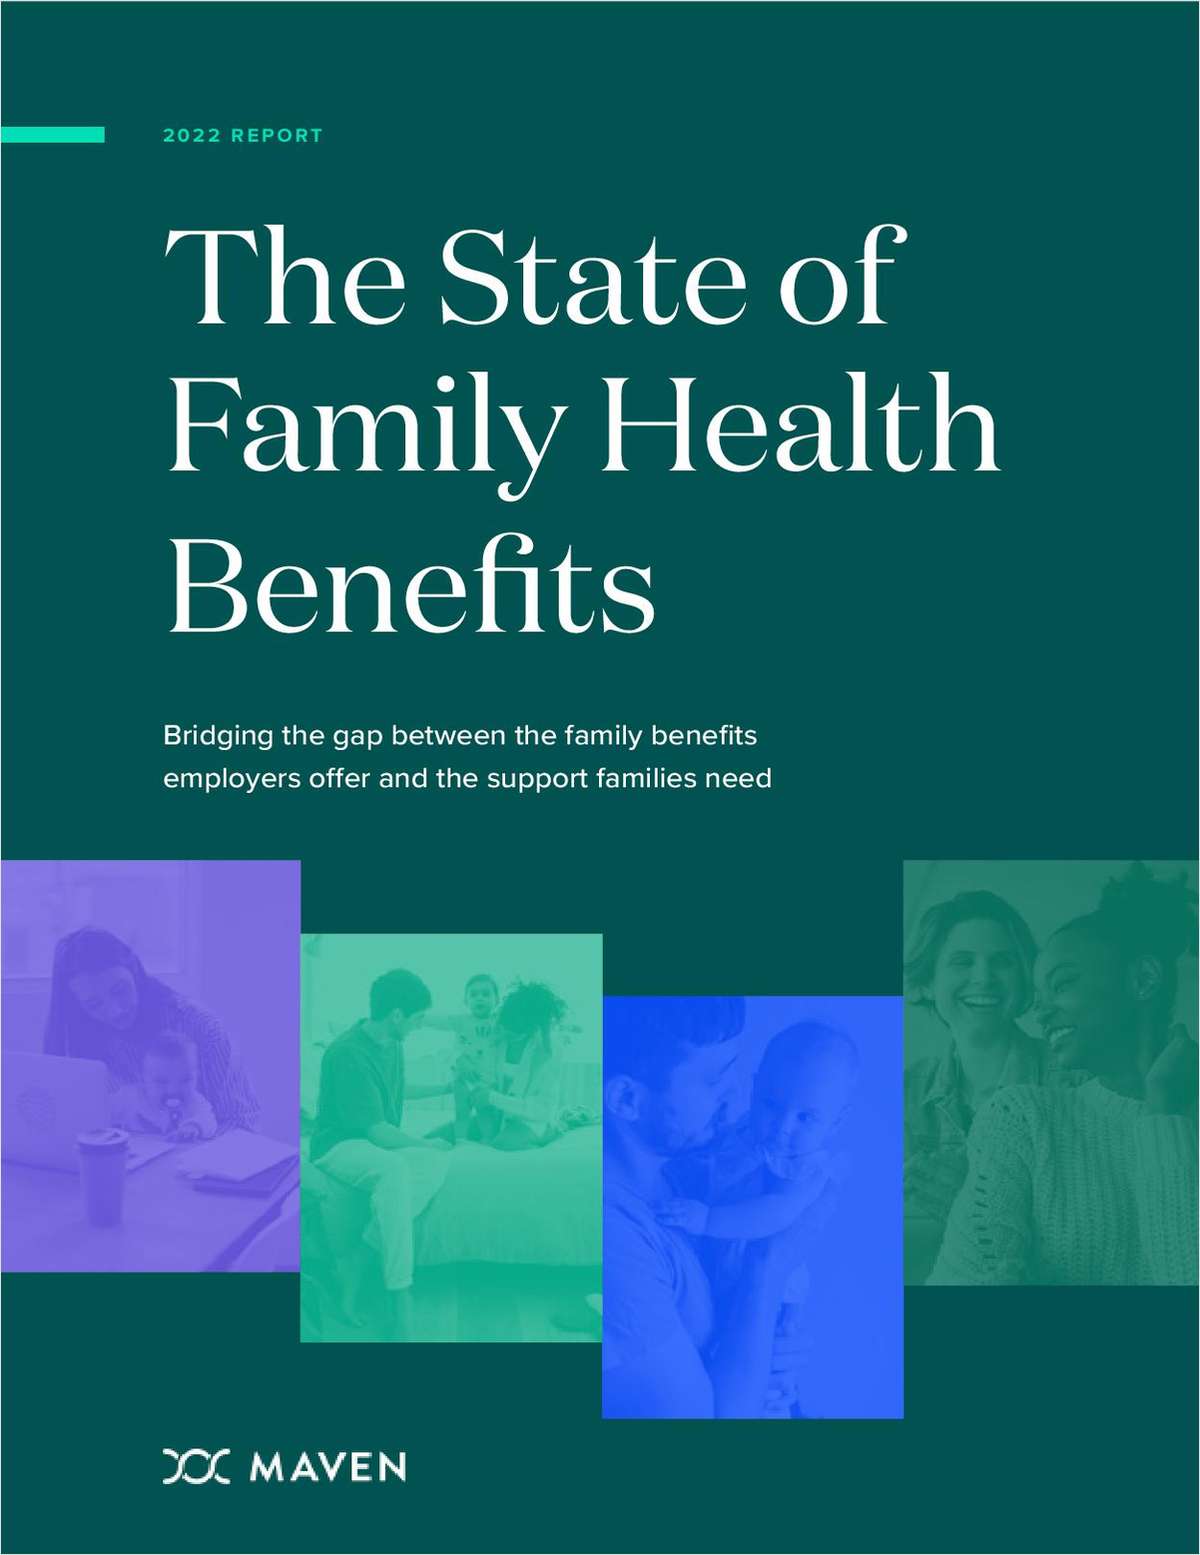 2022 Report: The State of Family Health Benefits